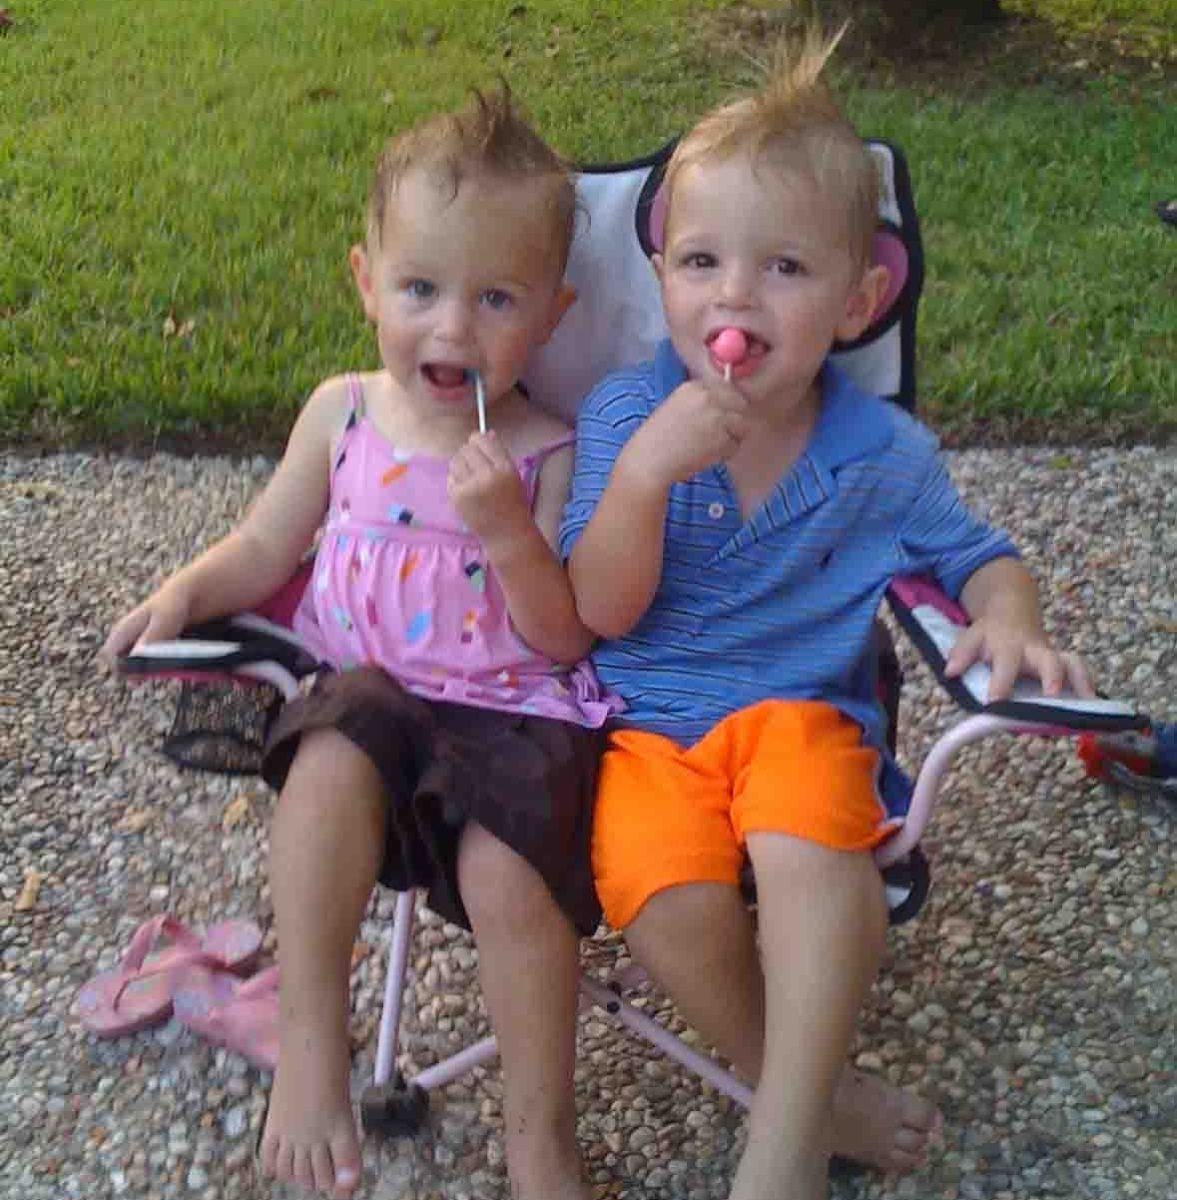 Canaan and Sloane Factor 26 enjoying lollipops and mohawks together.